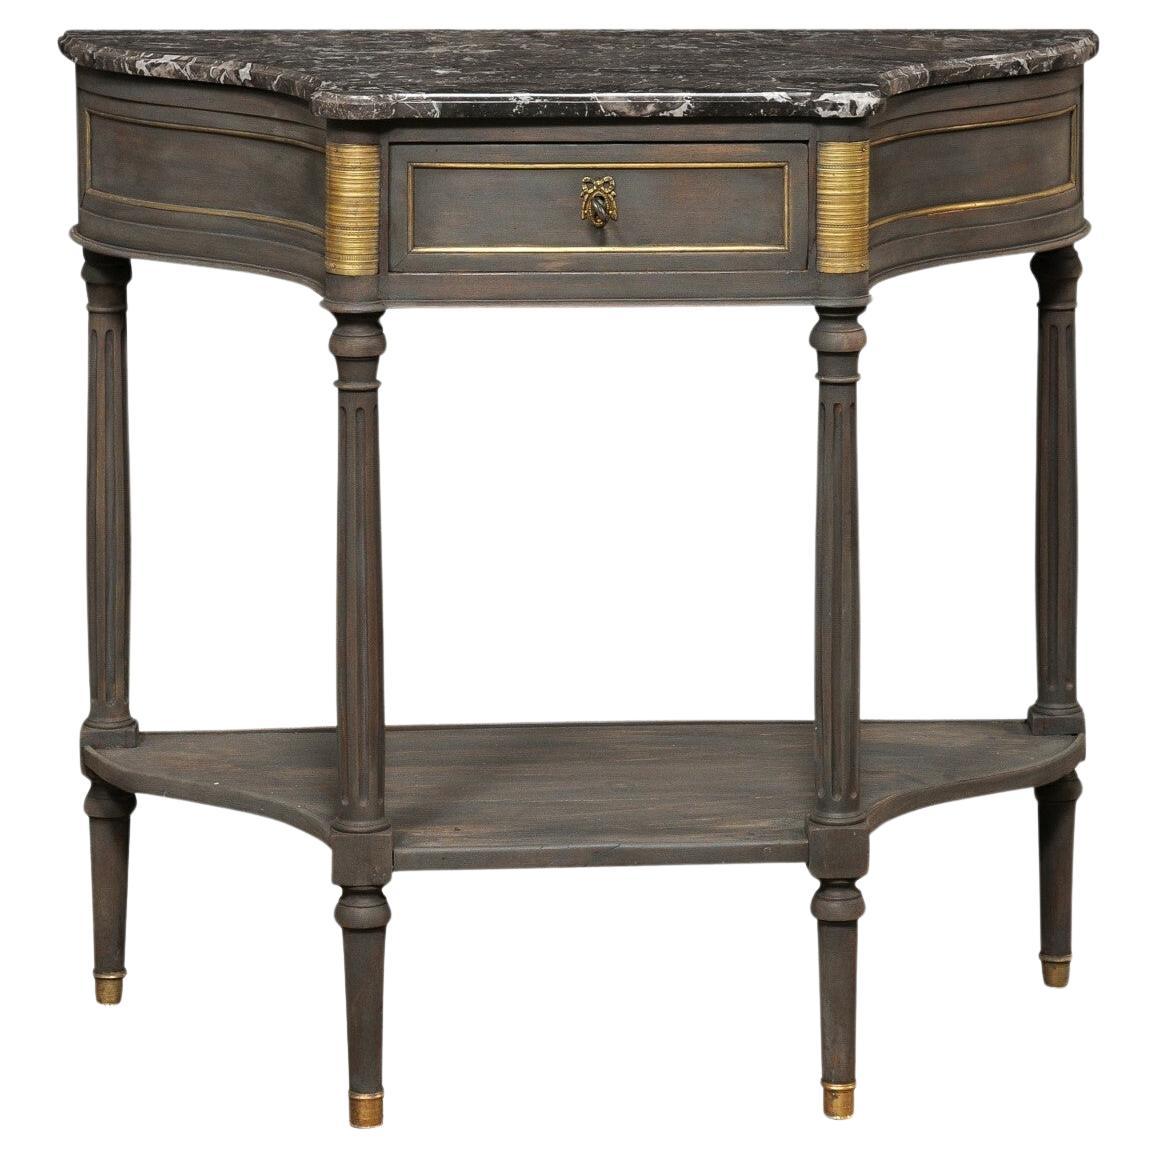 French Neoclassic Shapely Demi-Lune Console w/Marble Top & Brass Accents, 19th c